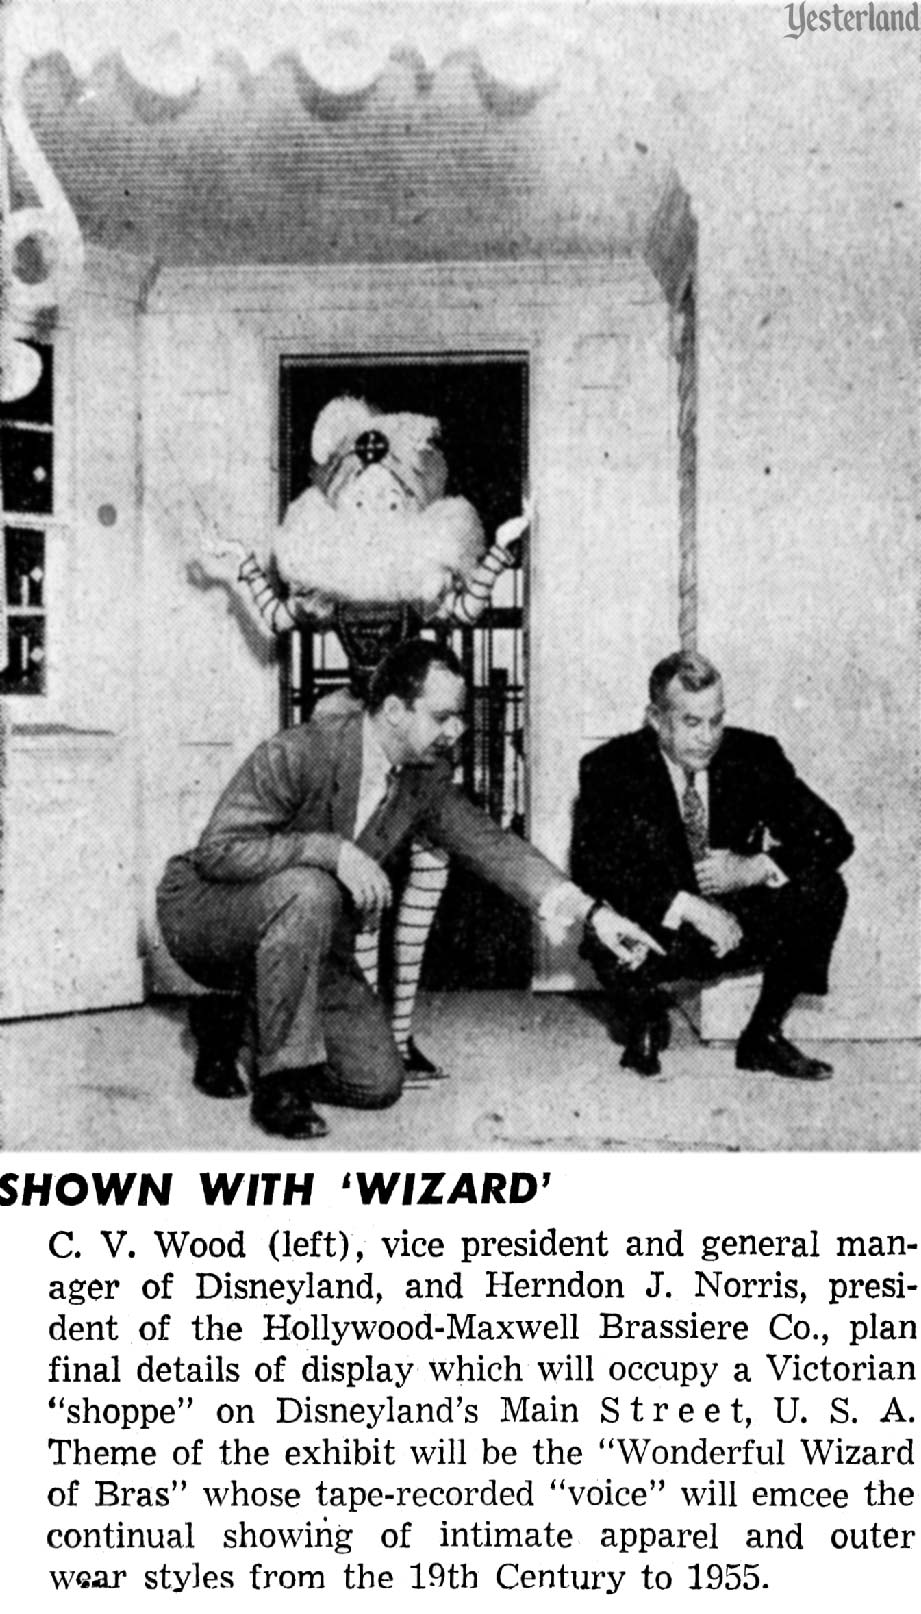 SHOWN WITH 'WIZARD' (Wizard of Bras at Disneyland)